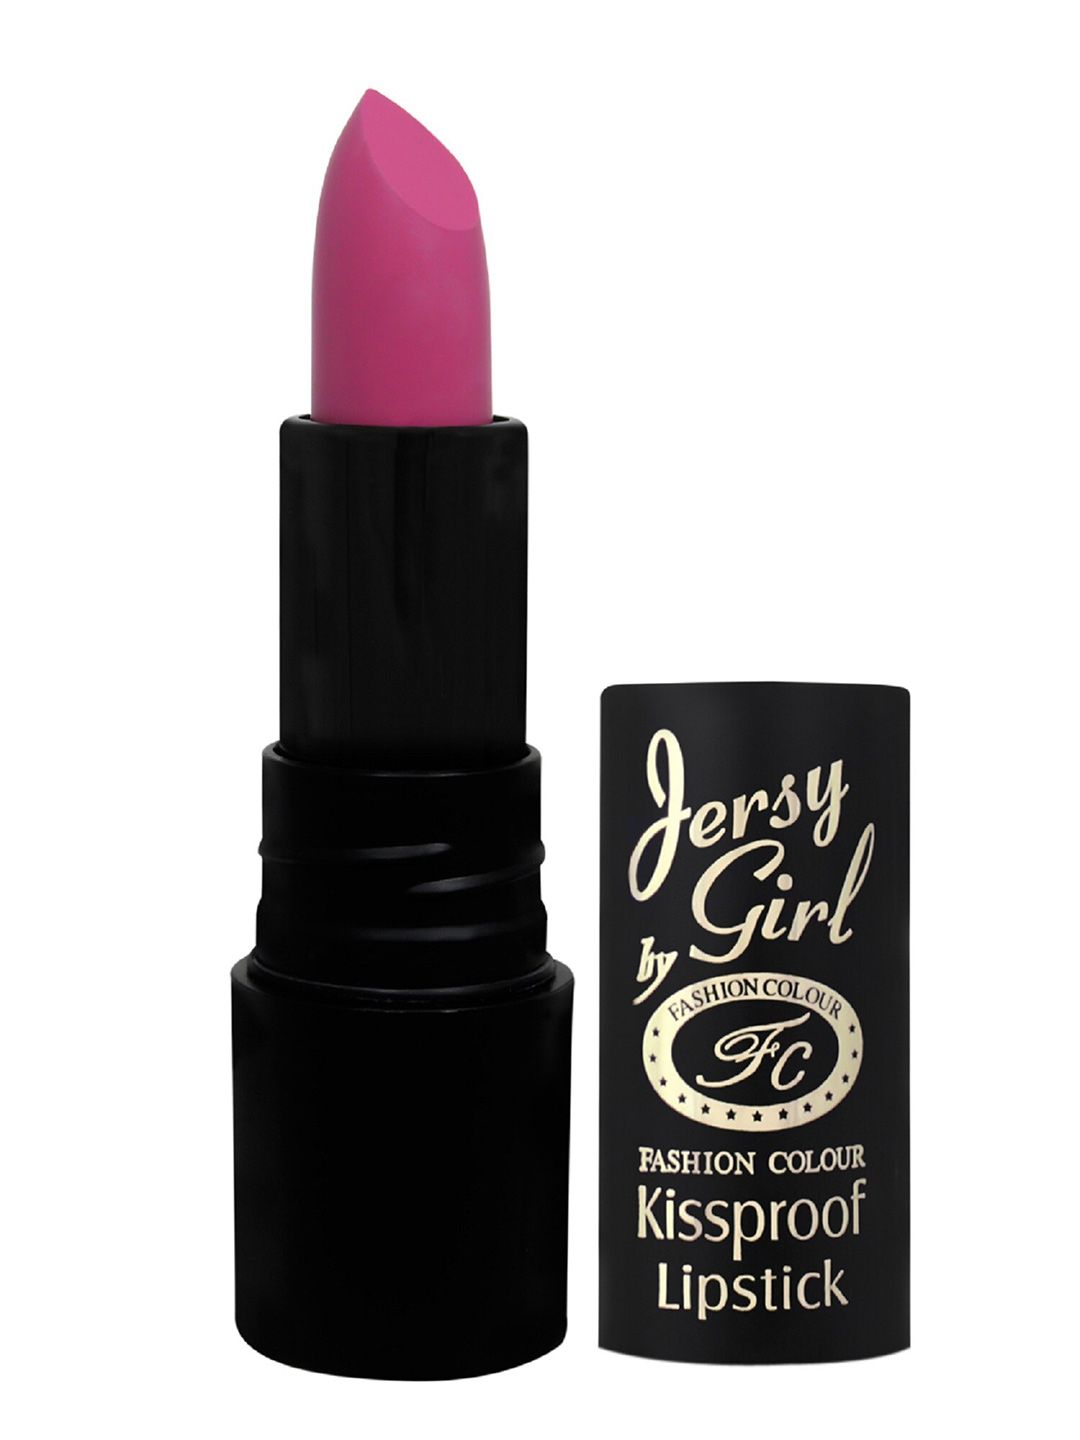 Fashion Colour Jersy Girl Kiss Proof Lipstick - Vivid Lilac 1 3.8 gm Price in India